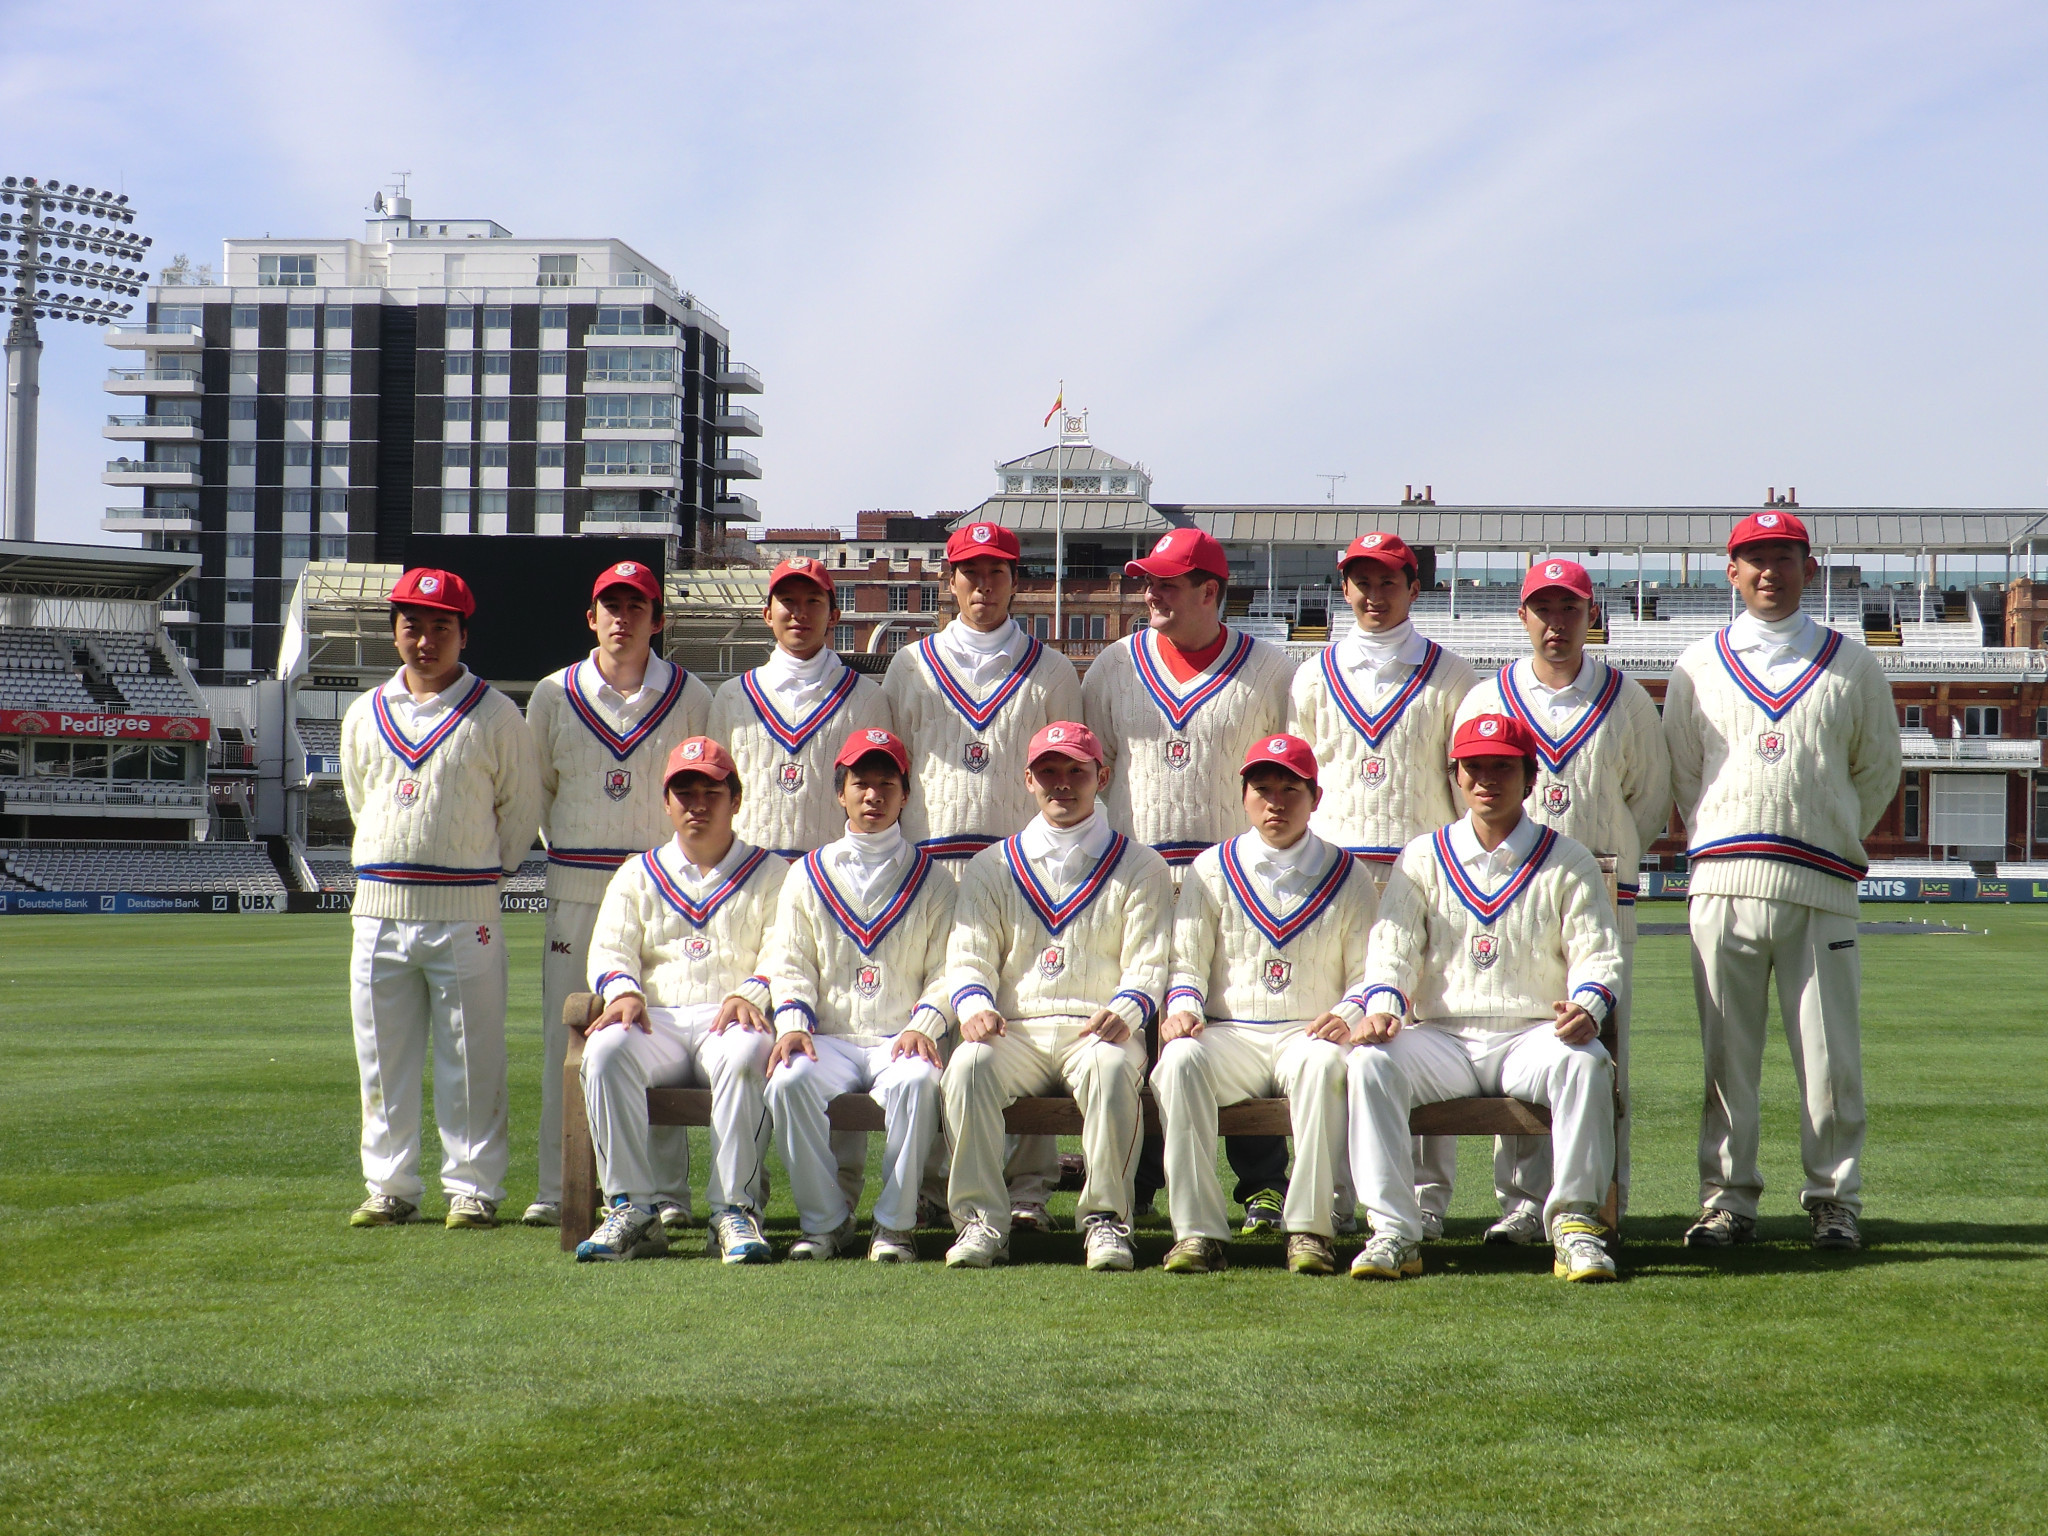 In 2013,Japan's cricketers played at Lord's, considered the home of Cricket ©ITG